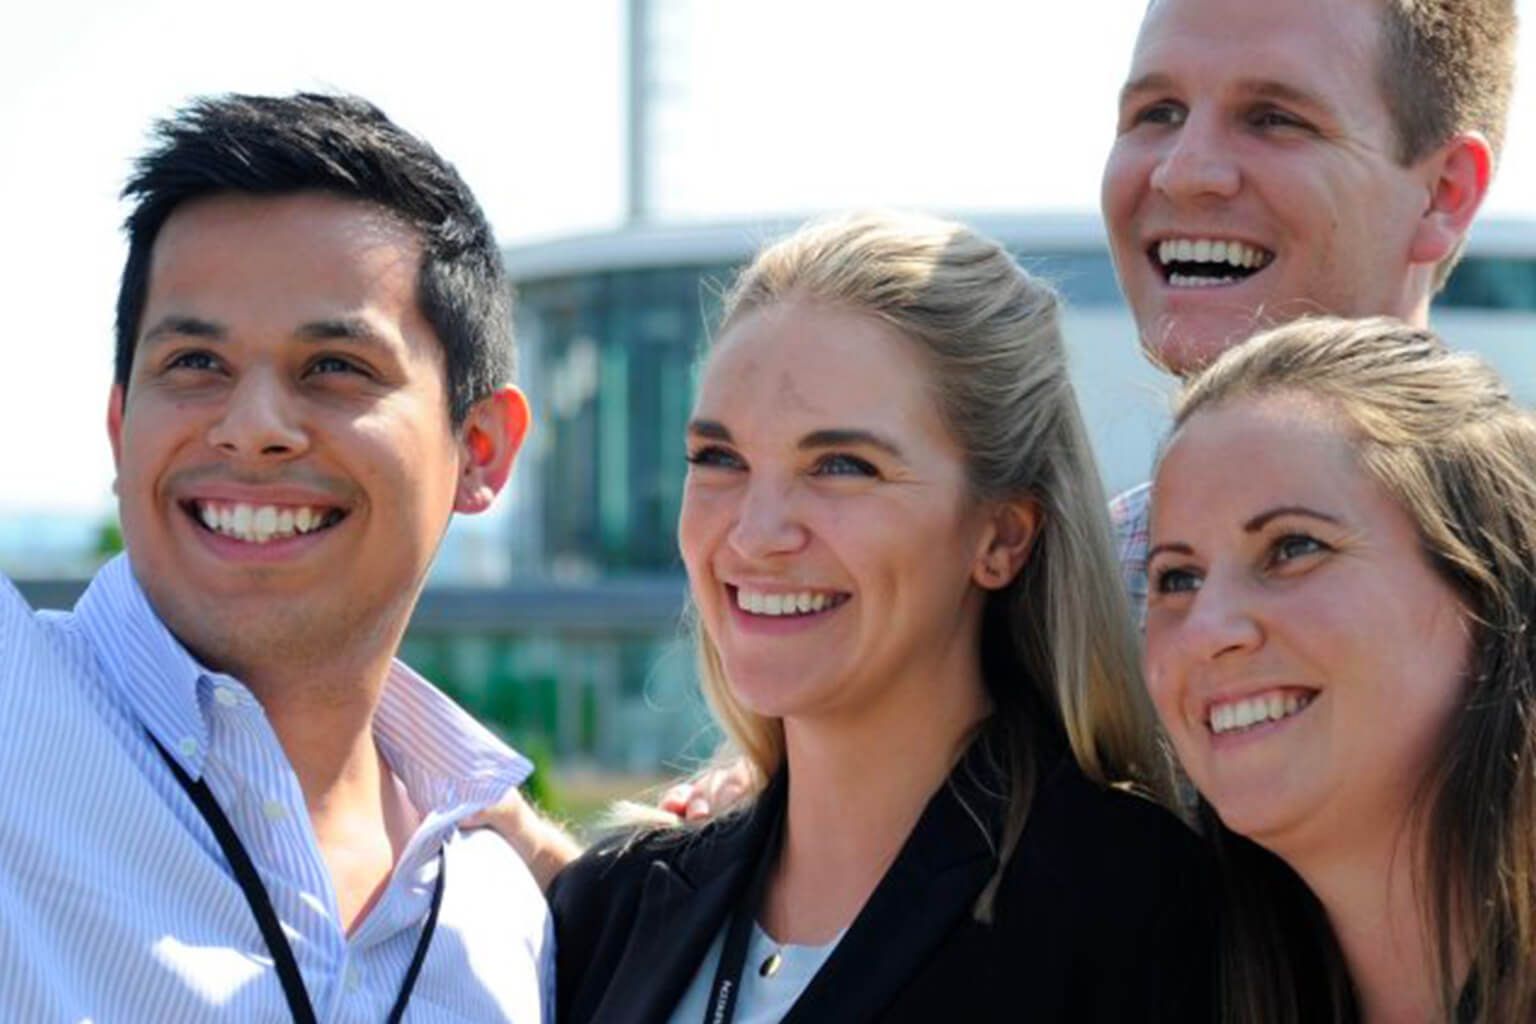 Equinor employees smiling